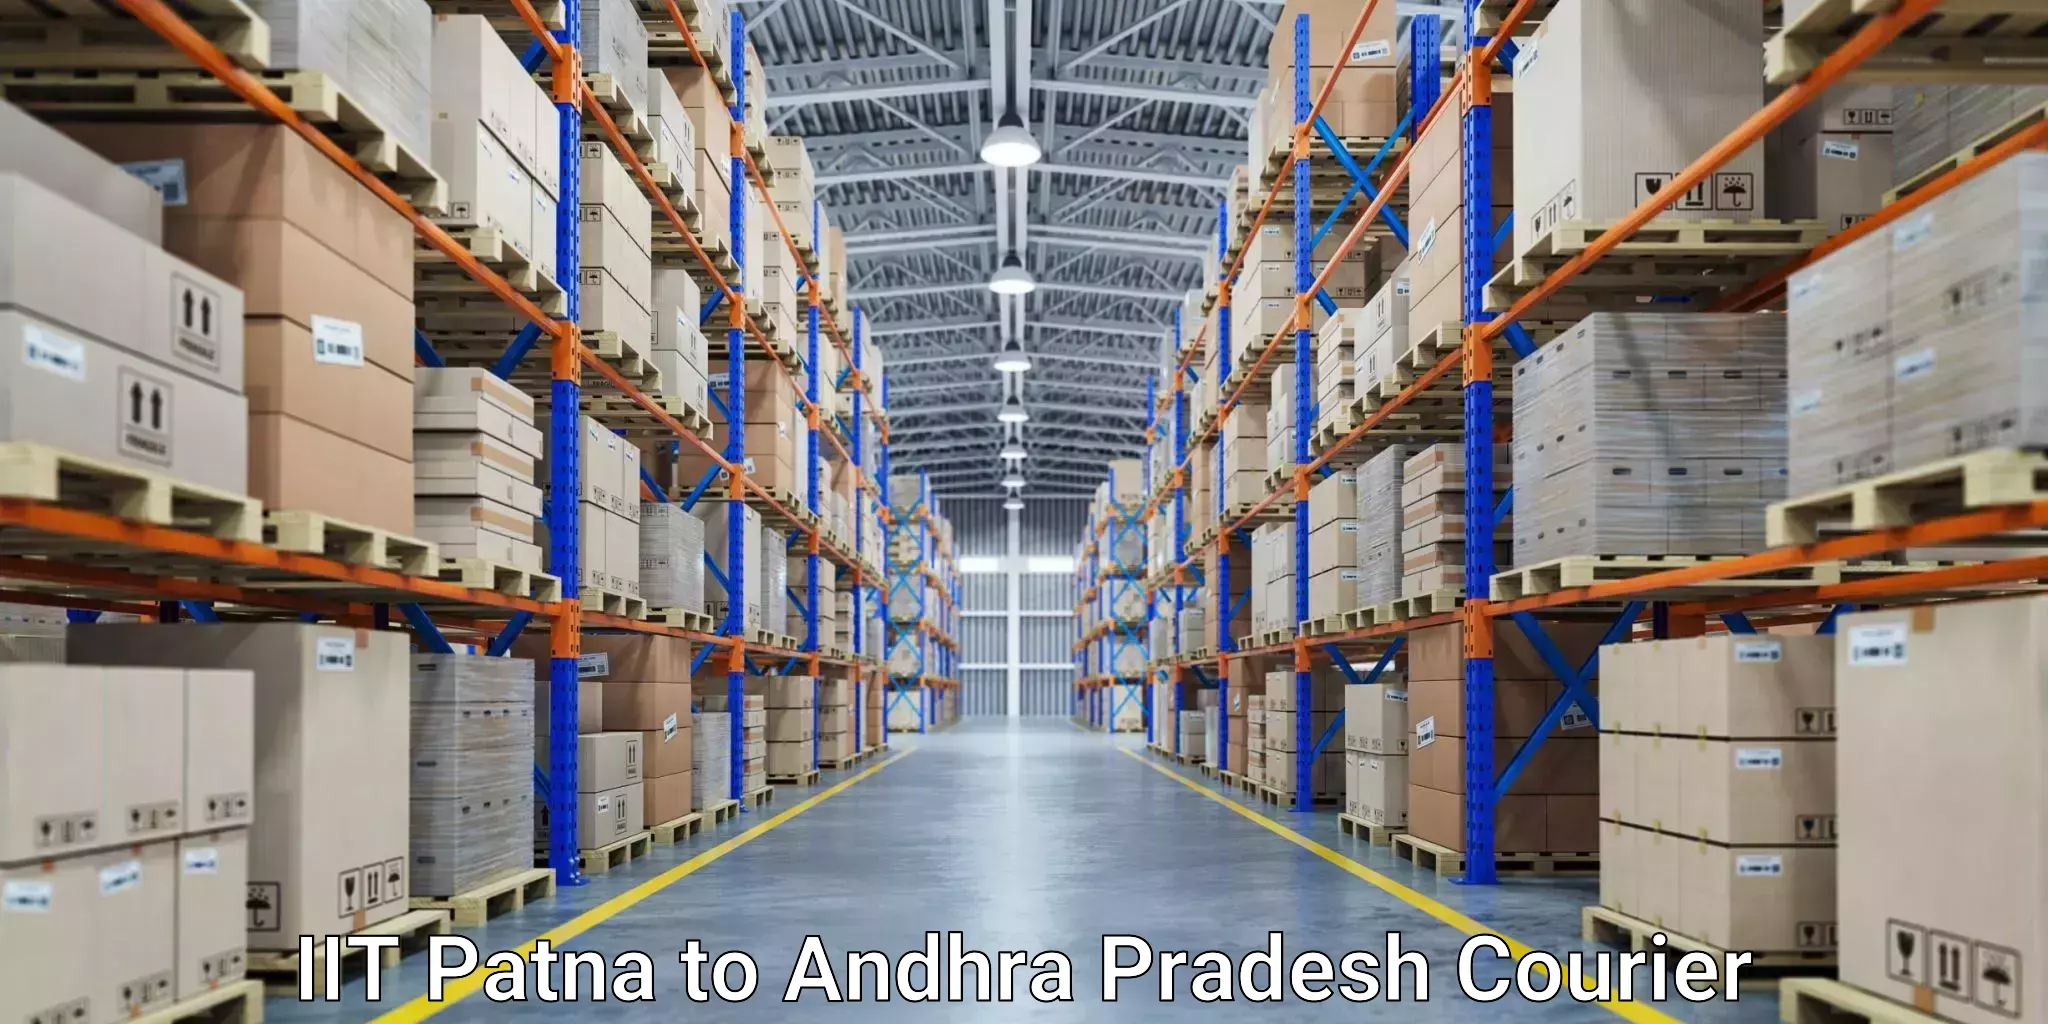 Flexible delivery scheduling in IIT Patna to Andhra Pradesh